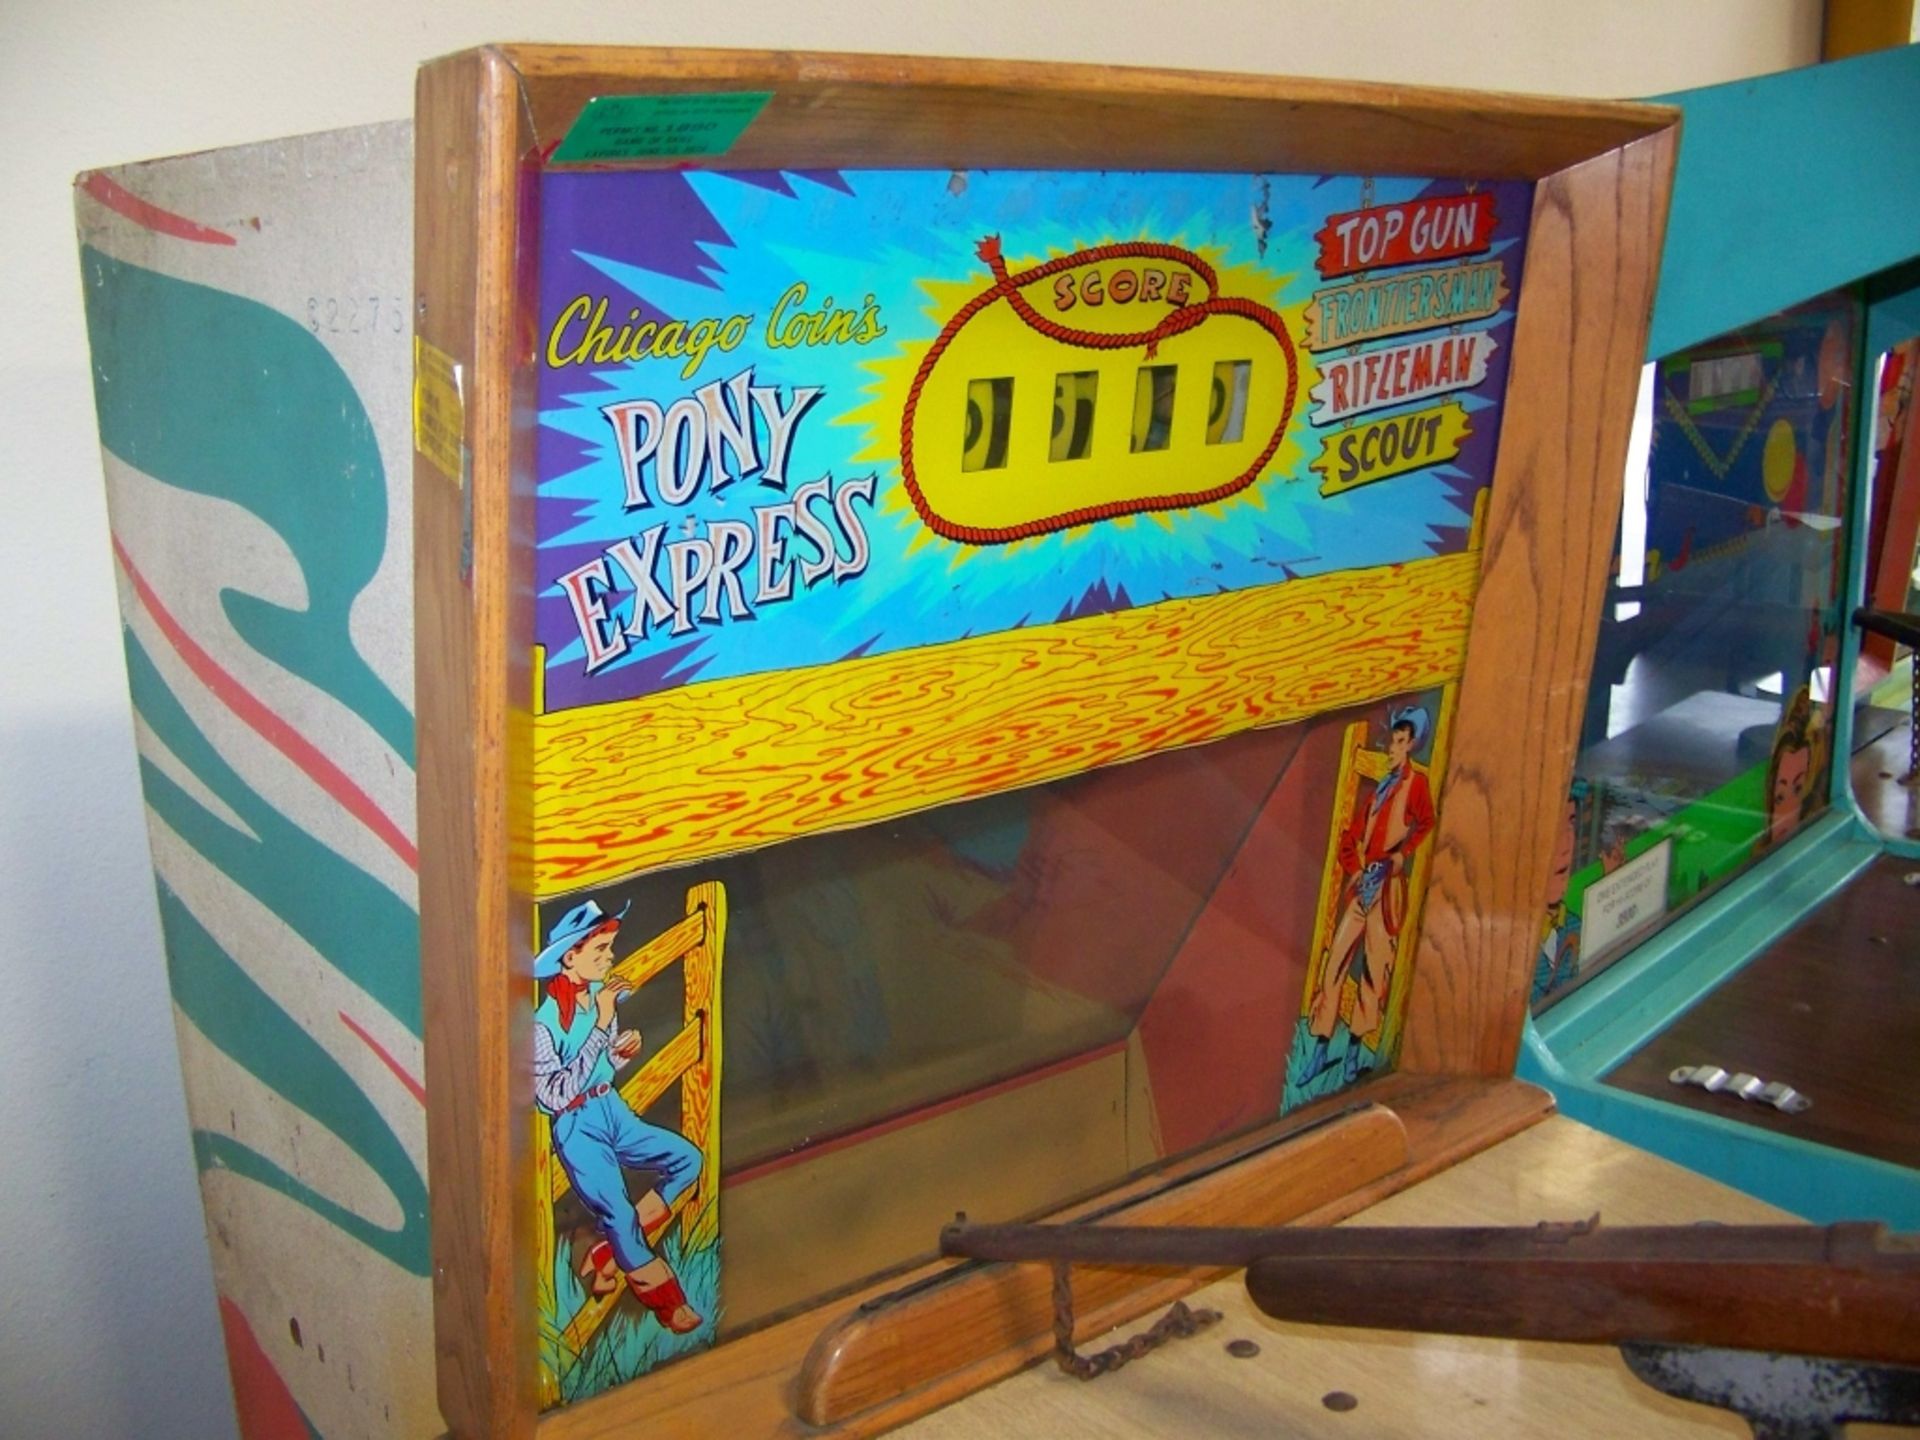 1960 CHICAGO COIN'S PONY EXPRESS RIFLE ARCADE GAME - Image 5 of 6